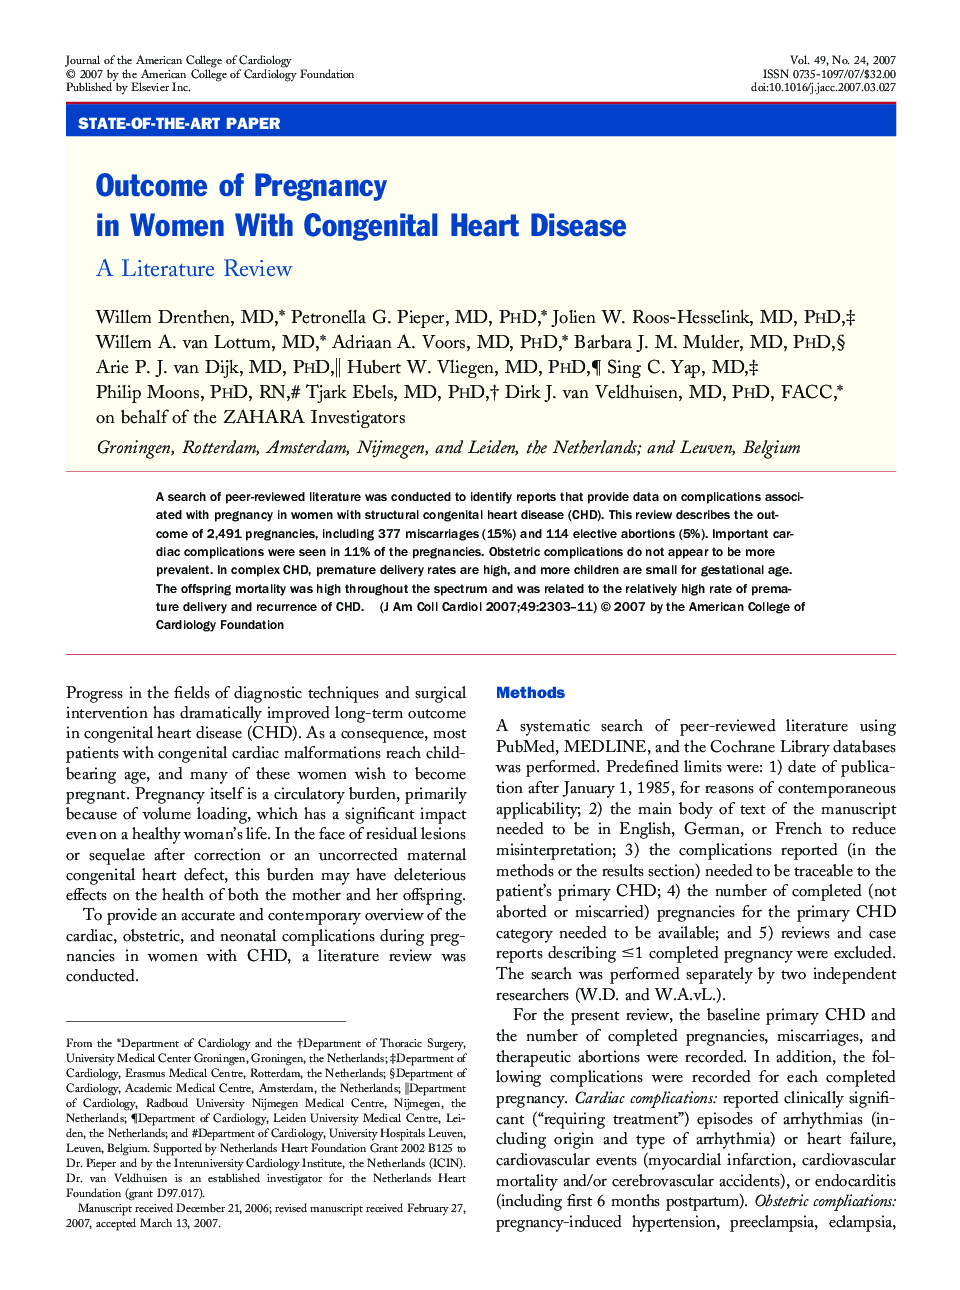 Outcome of Pregnancy in Women With Congenital Heart Disease : A Literature Review